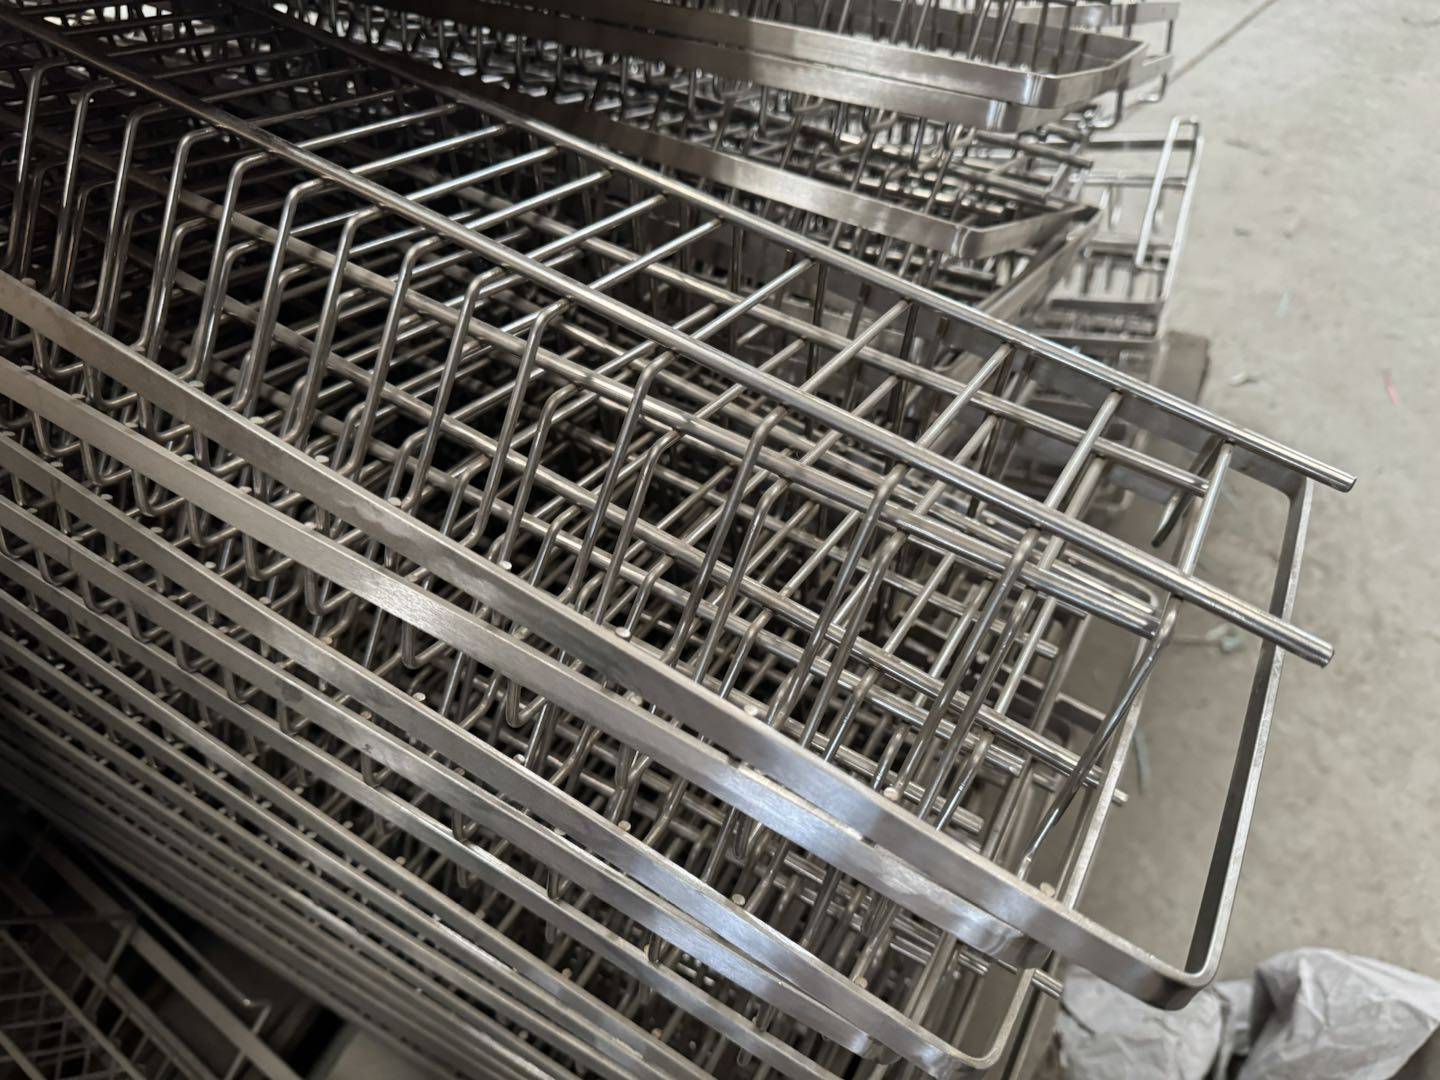 Choosing the right kitchen basket for long-lasting durability